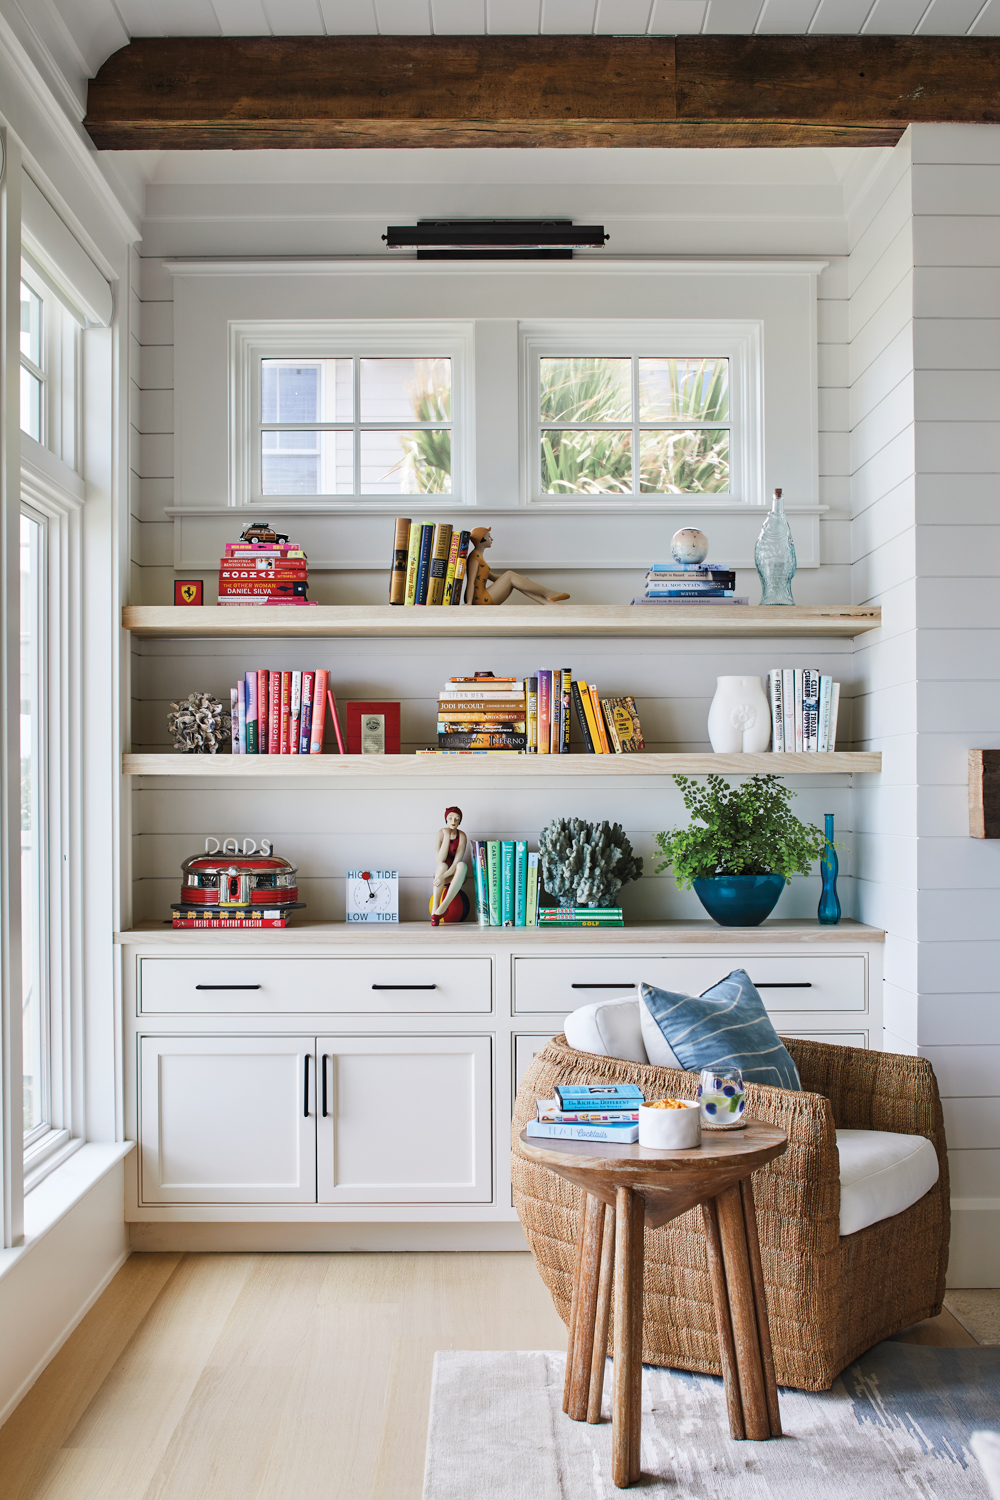 Built-in book shelves and cabinetry...